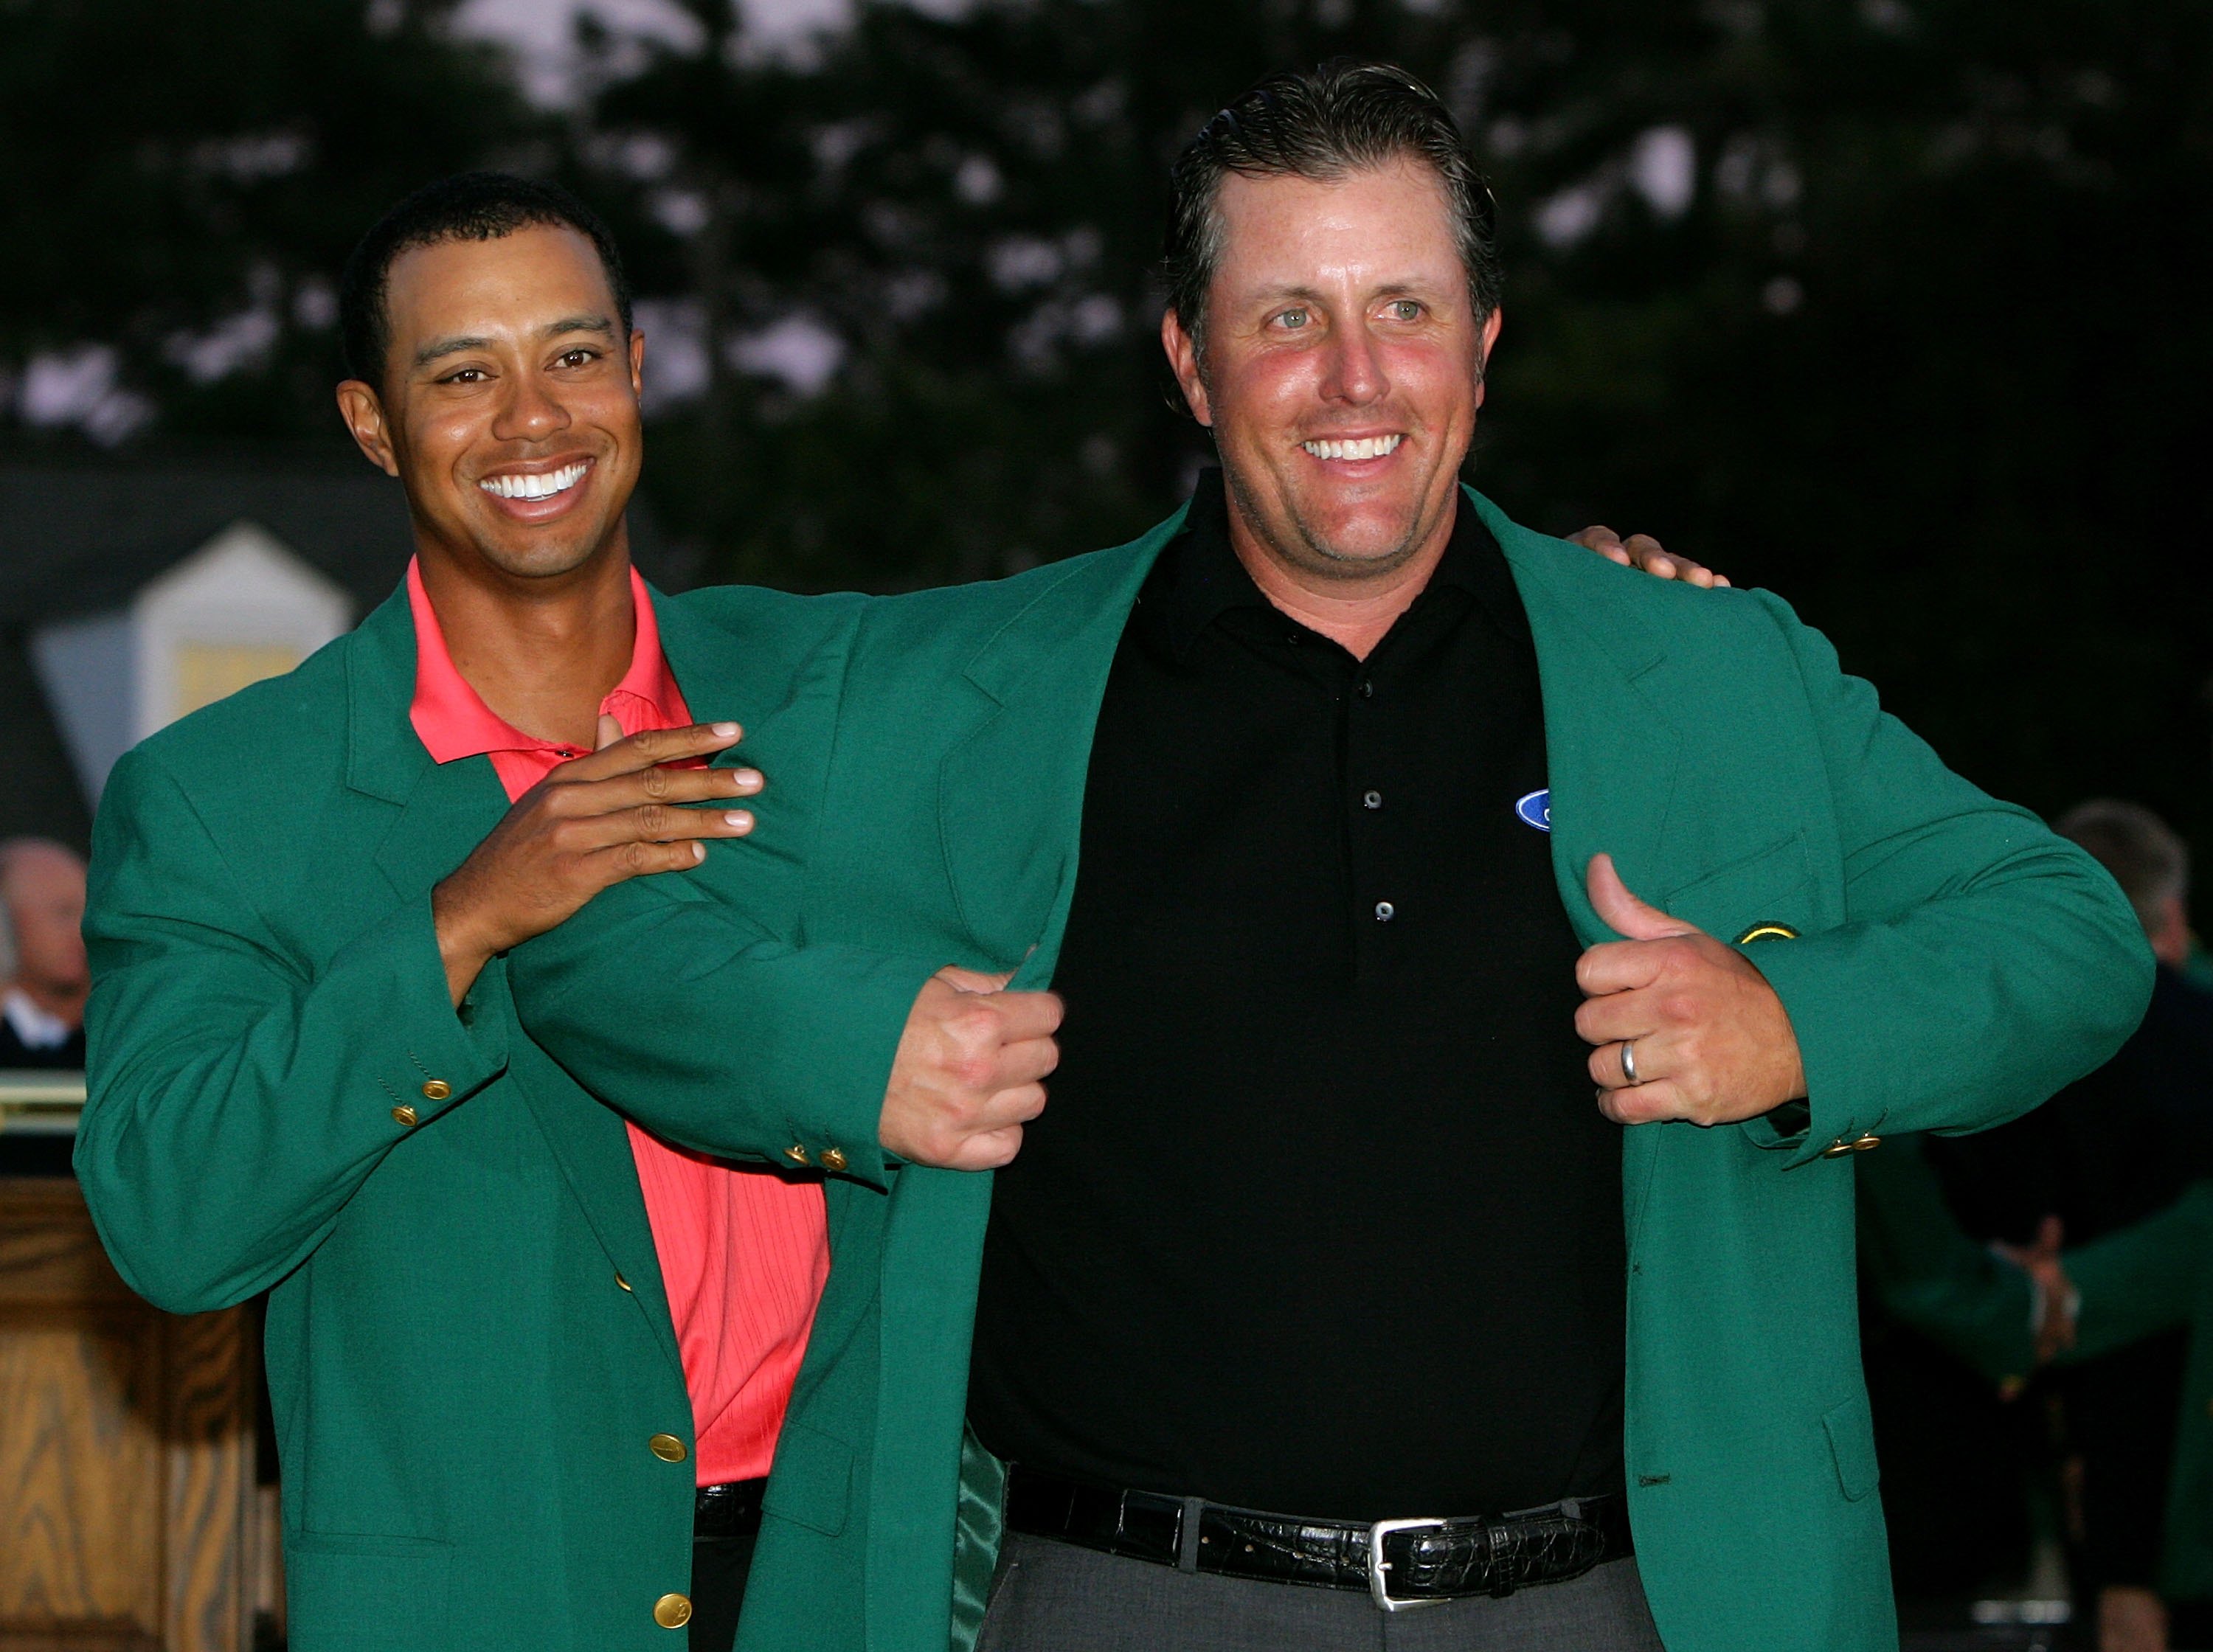 AUGUSTA, GA - APRIL 09:  Tiger Woods puts the green jacket on Phil Mickelson after he won The Masters at the Augusta National Golf Club after the final round on April 9, 2006 in Augusta, Georgia.   Mickelson won with the score seven under.  (Photo by Davi